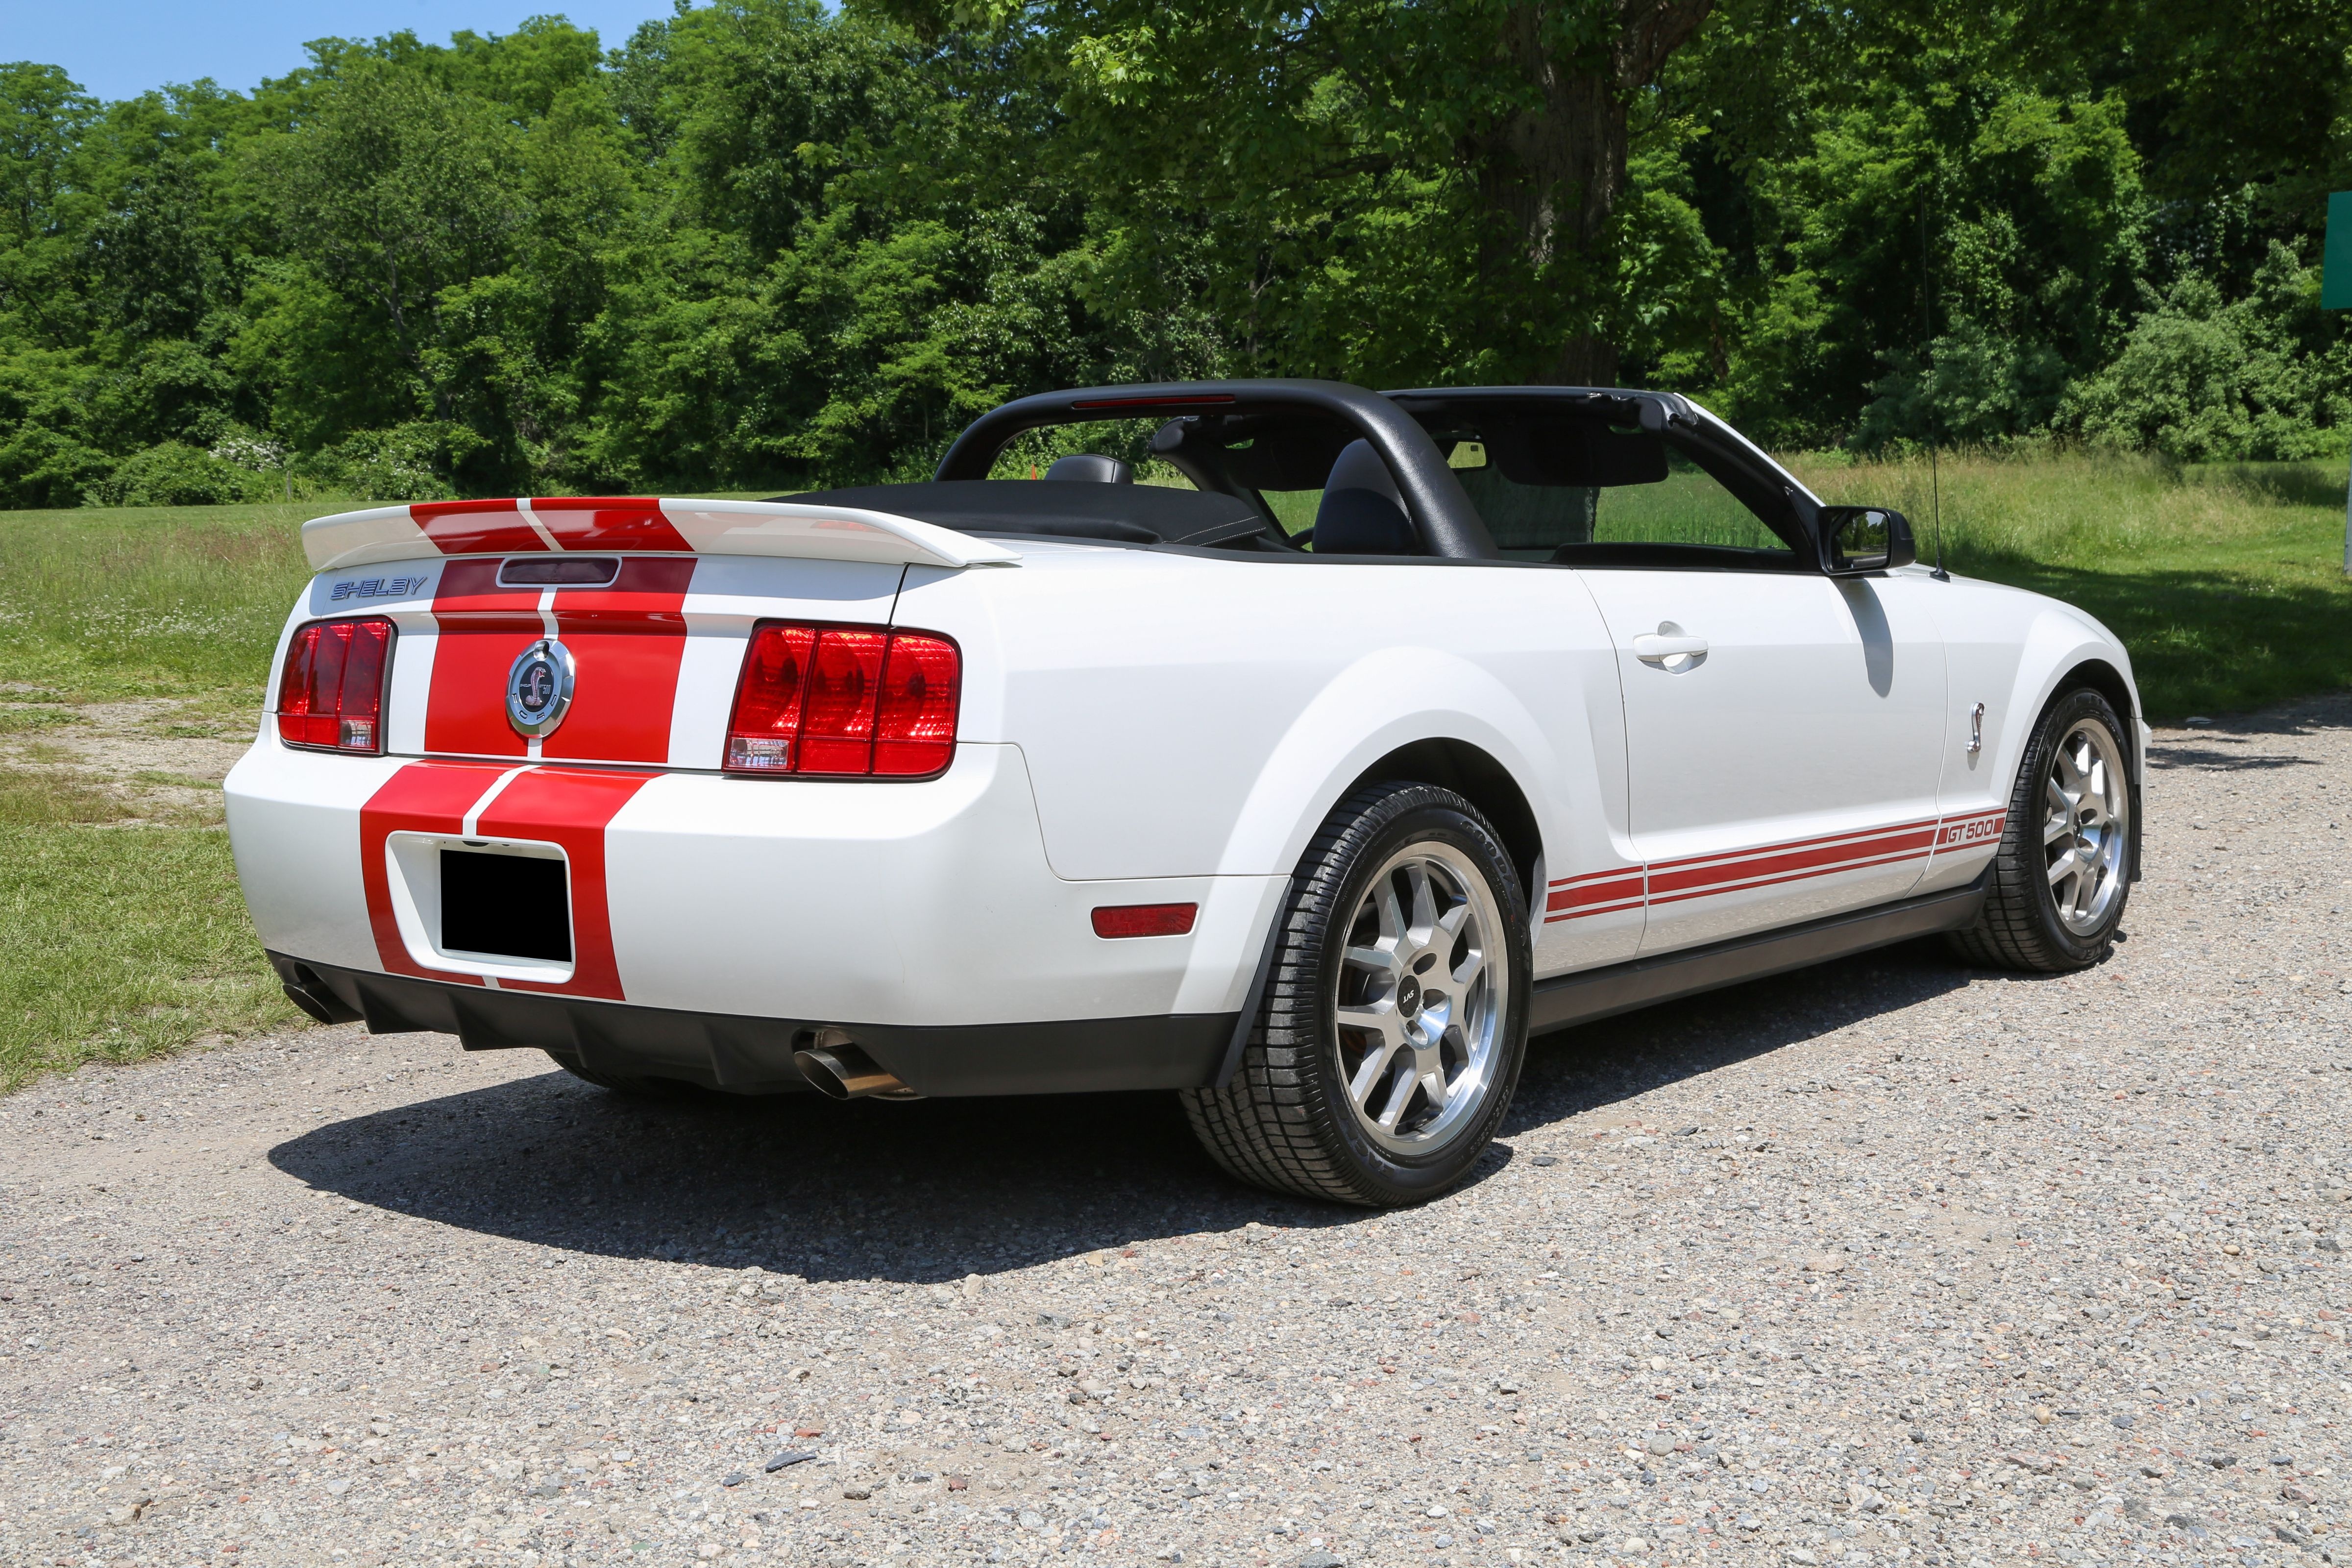 4k-Mile 2008 Ford Mustang Shelby GT500 Convertible 6-Speed